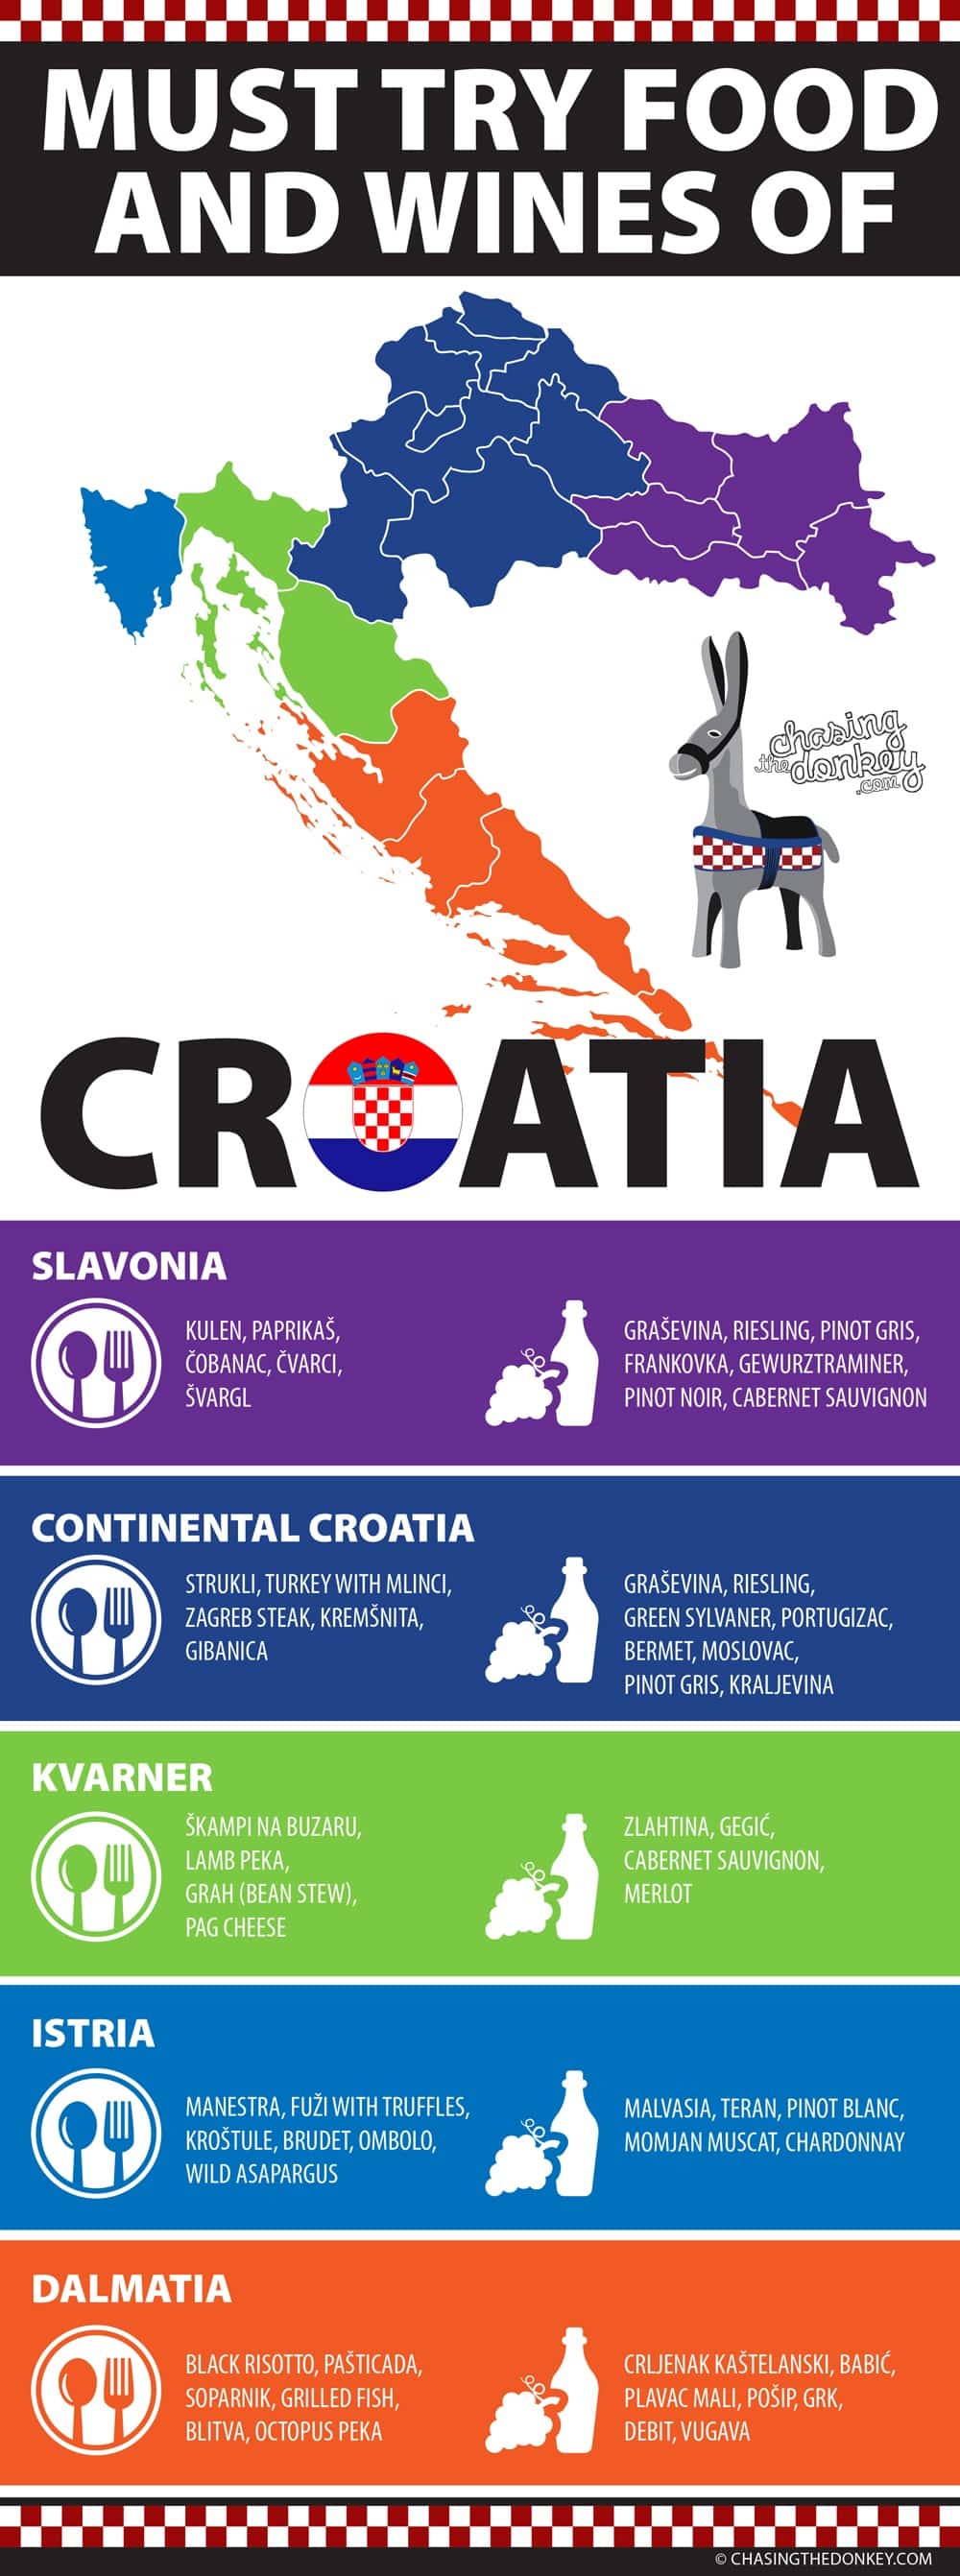 Food and Wine Not to be Missed in Croatia | Croatia Travel Blog